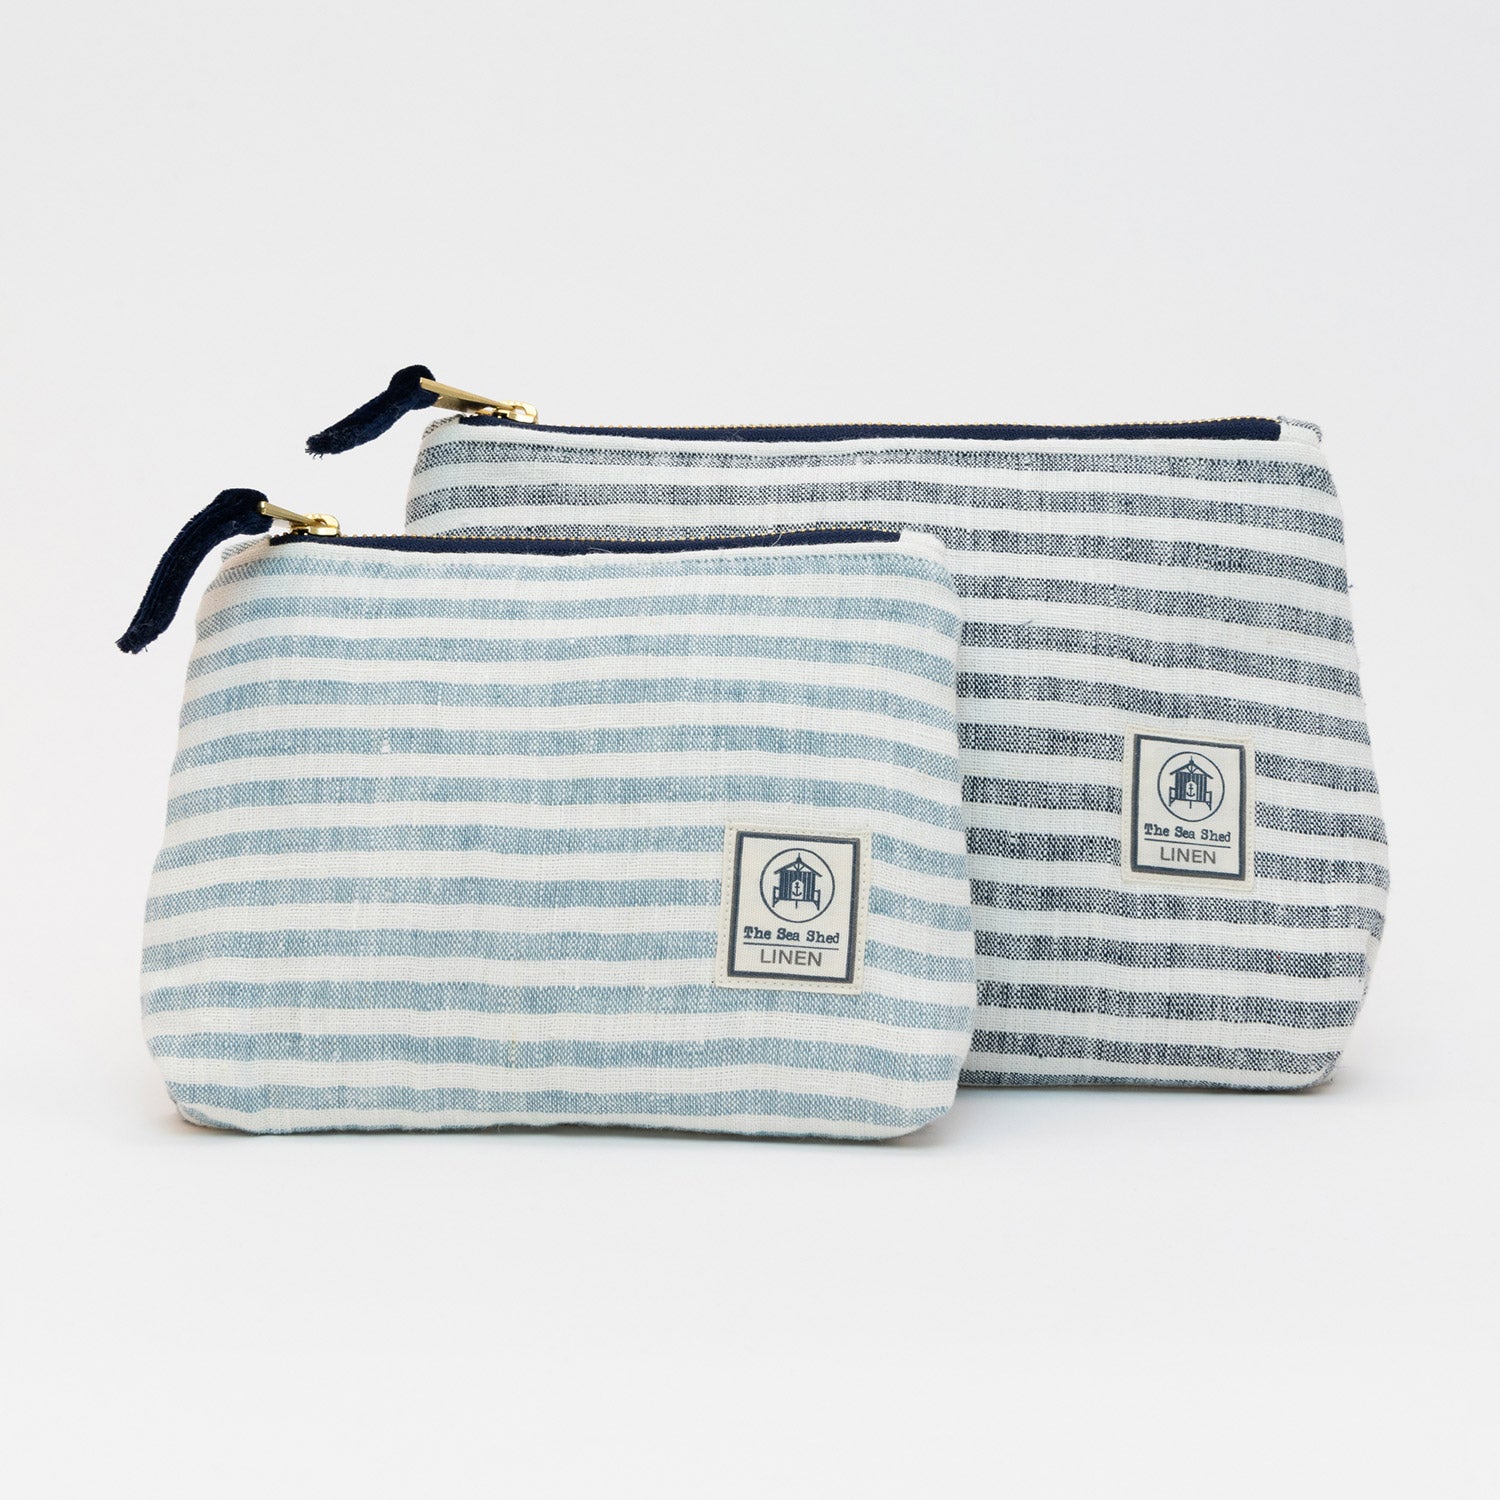 Two linen cosmetic bags pictured on a white background. They both have blue and white stripes.